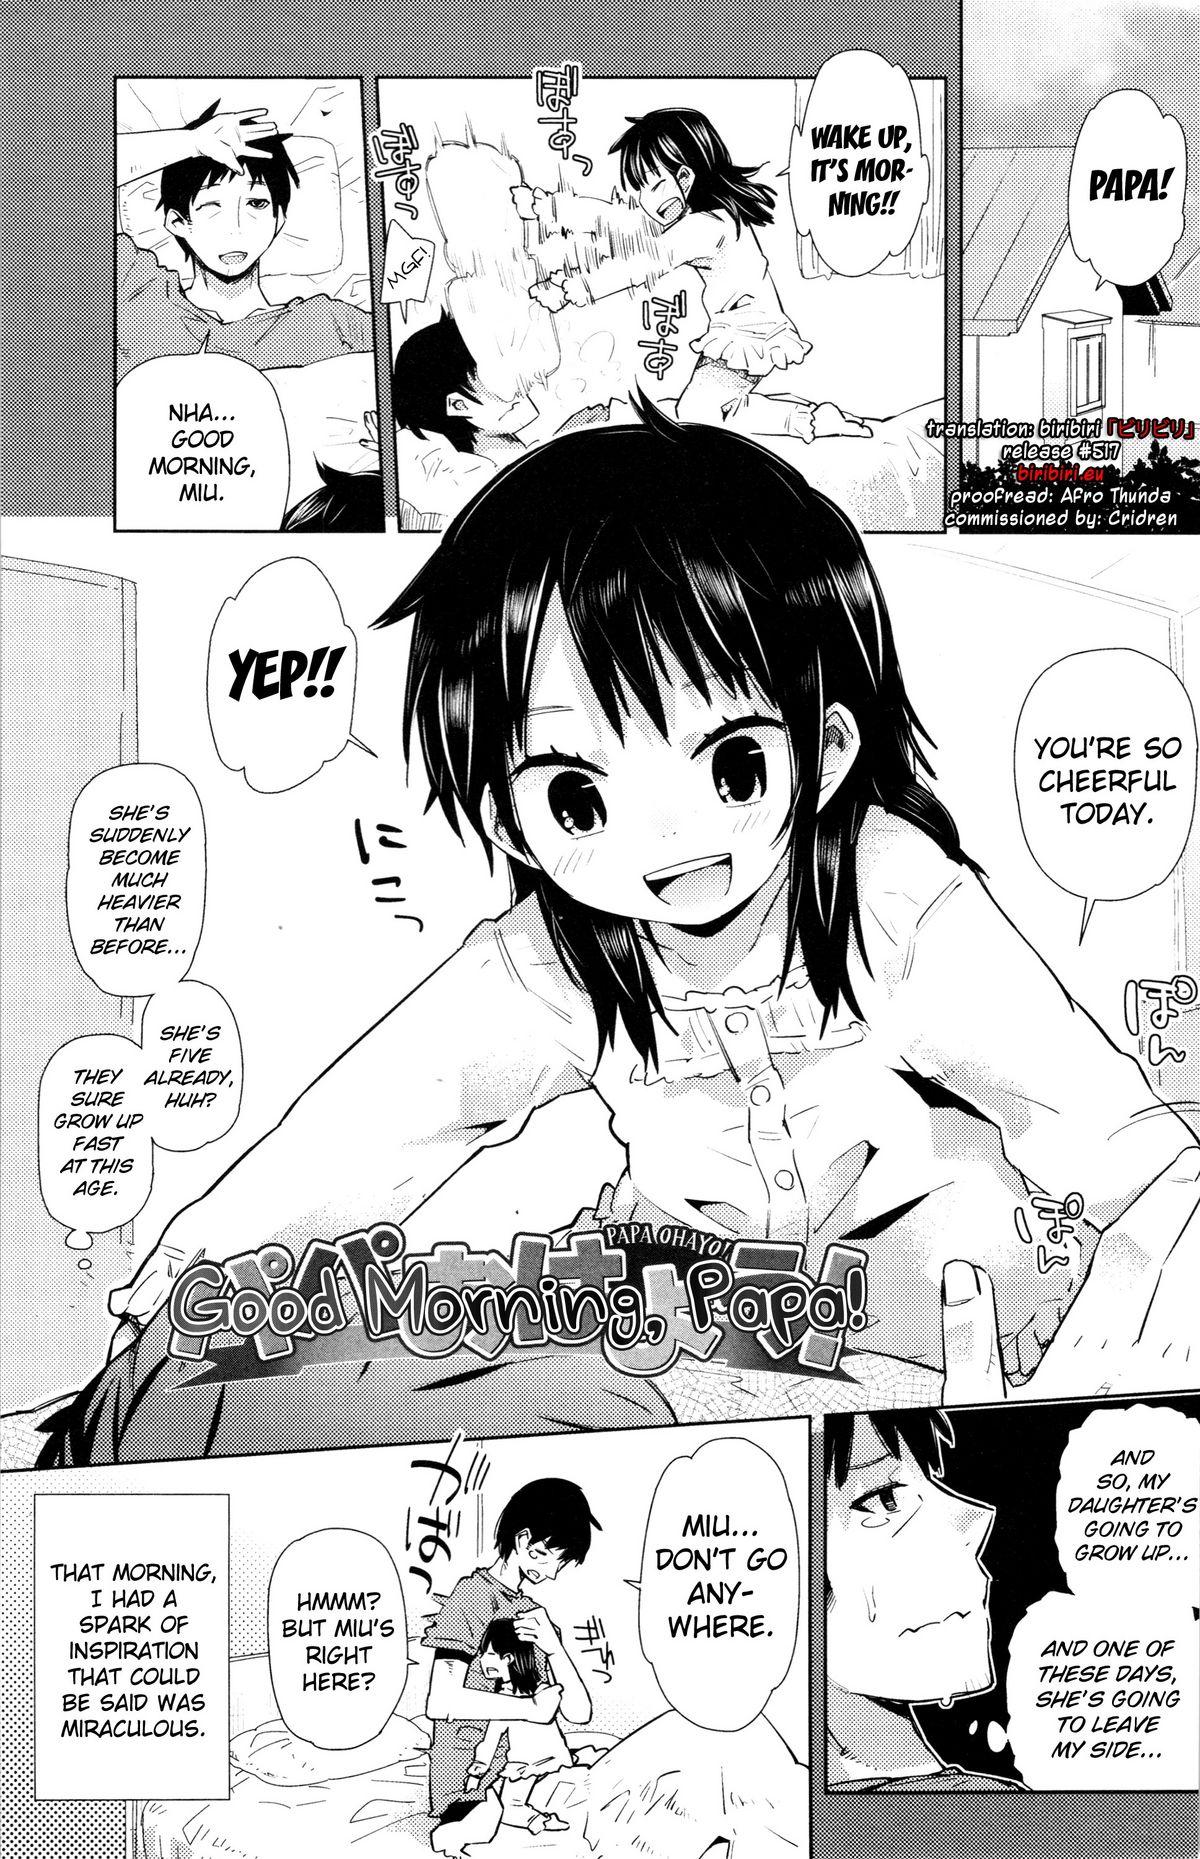 Small Tits Chicchai ga Ippai! Ch. 1-10 Gaygroup - Page 1